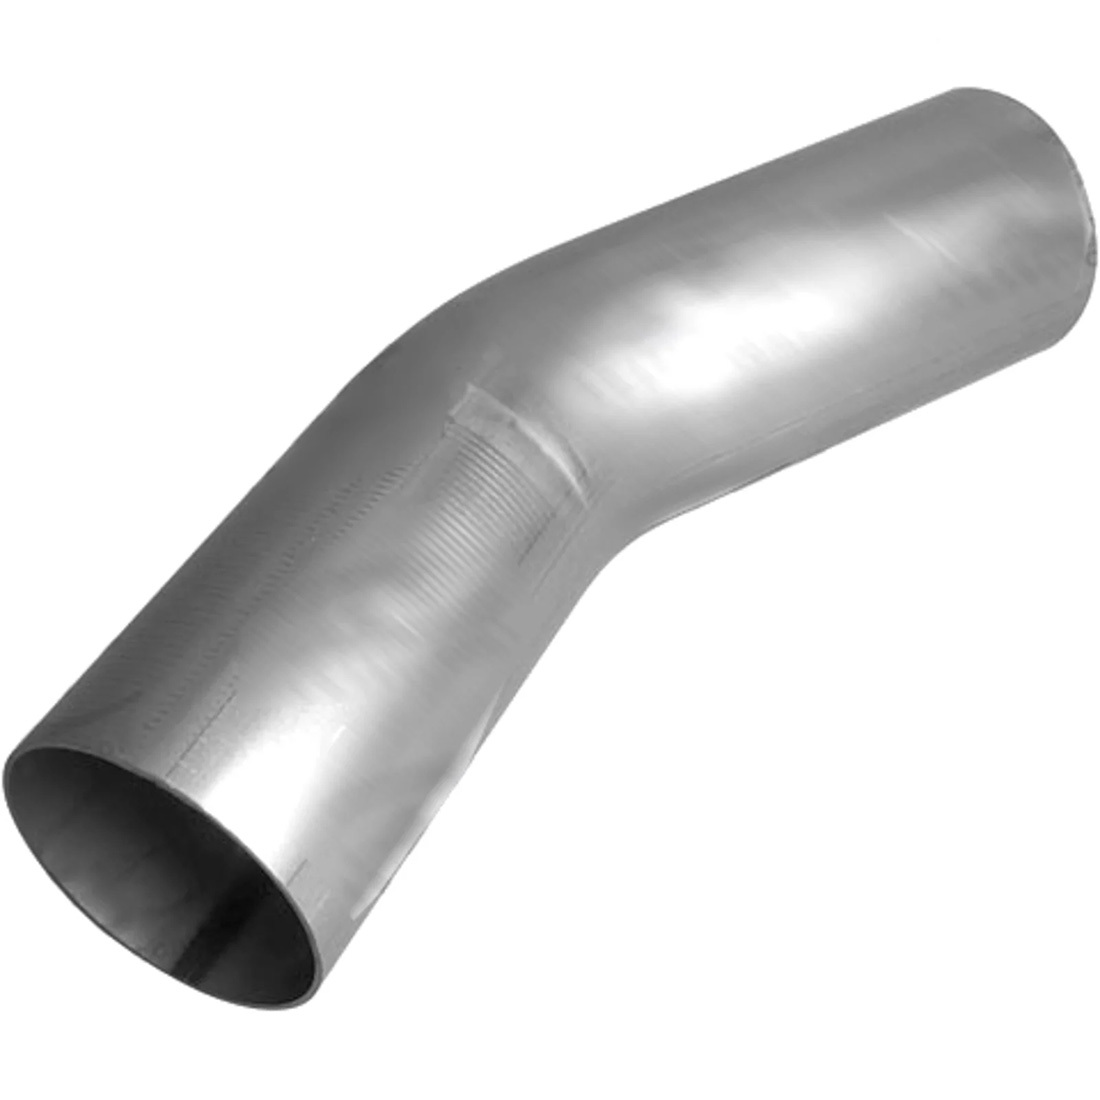 2 1/2" 30 Degrees Mandrel Bend Exhaust Pipe image